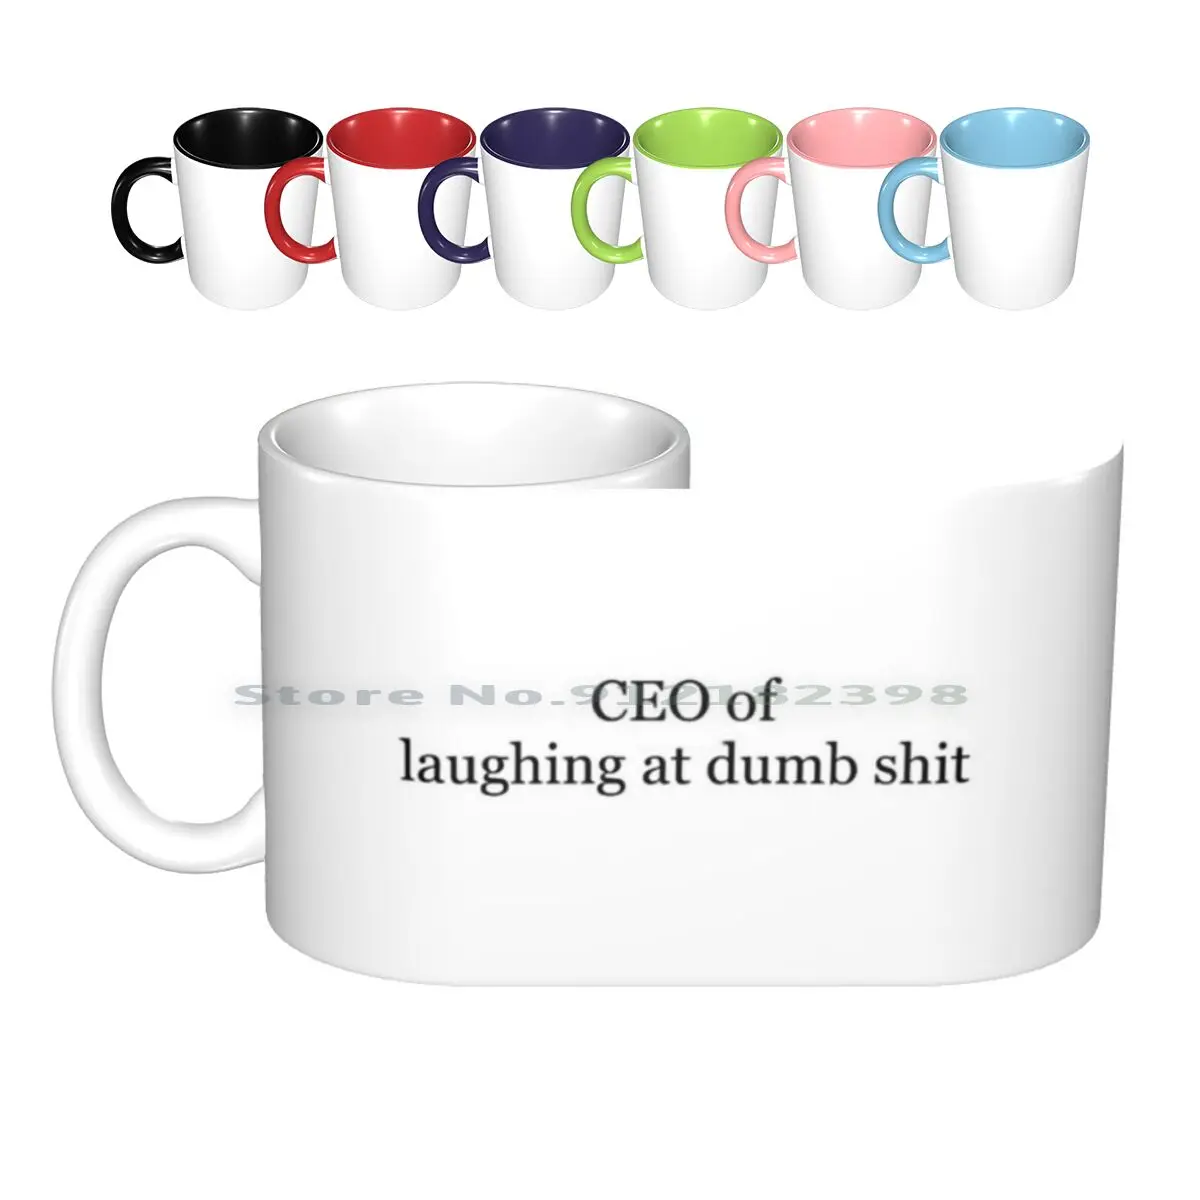 

Ceo Of Laughing At Dumb Shit Ceramic Mugs Coffee Cups Milk Tea Mug Ceo Funny Cute Amazing Best Selling Ceo Of Black Text Meme